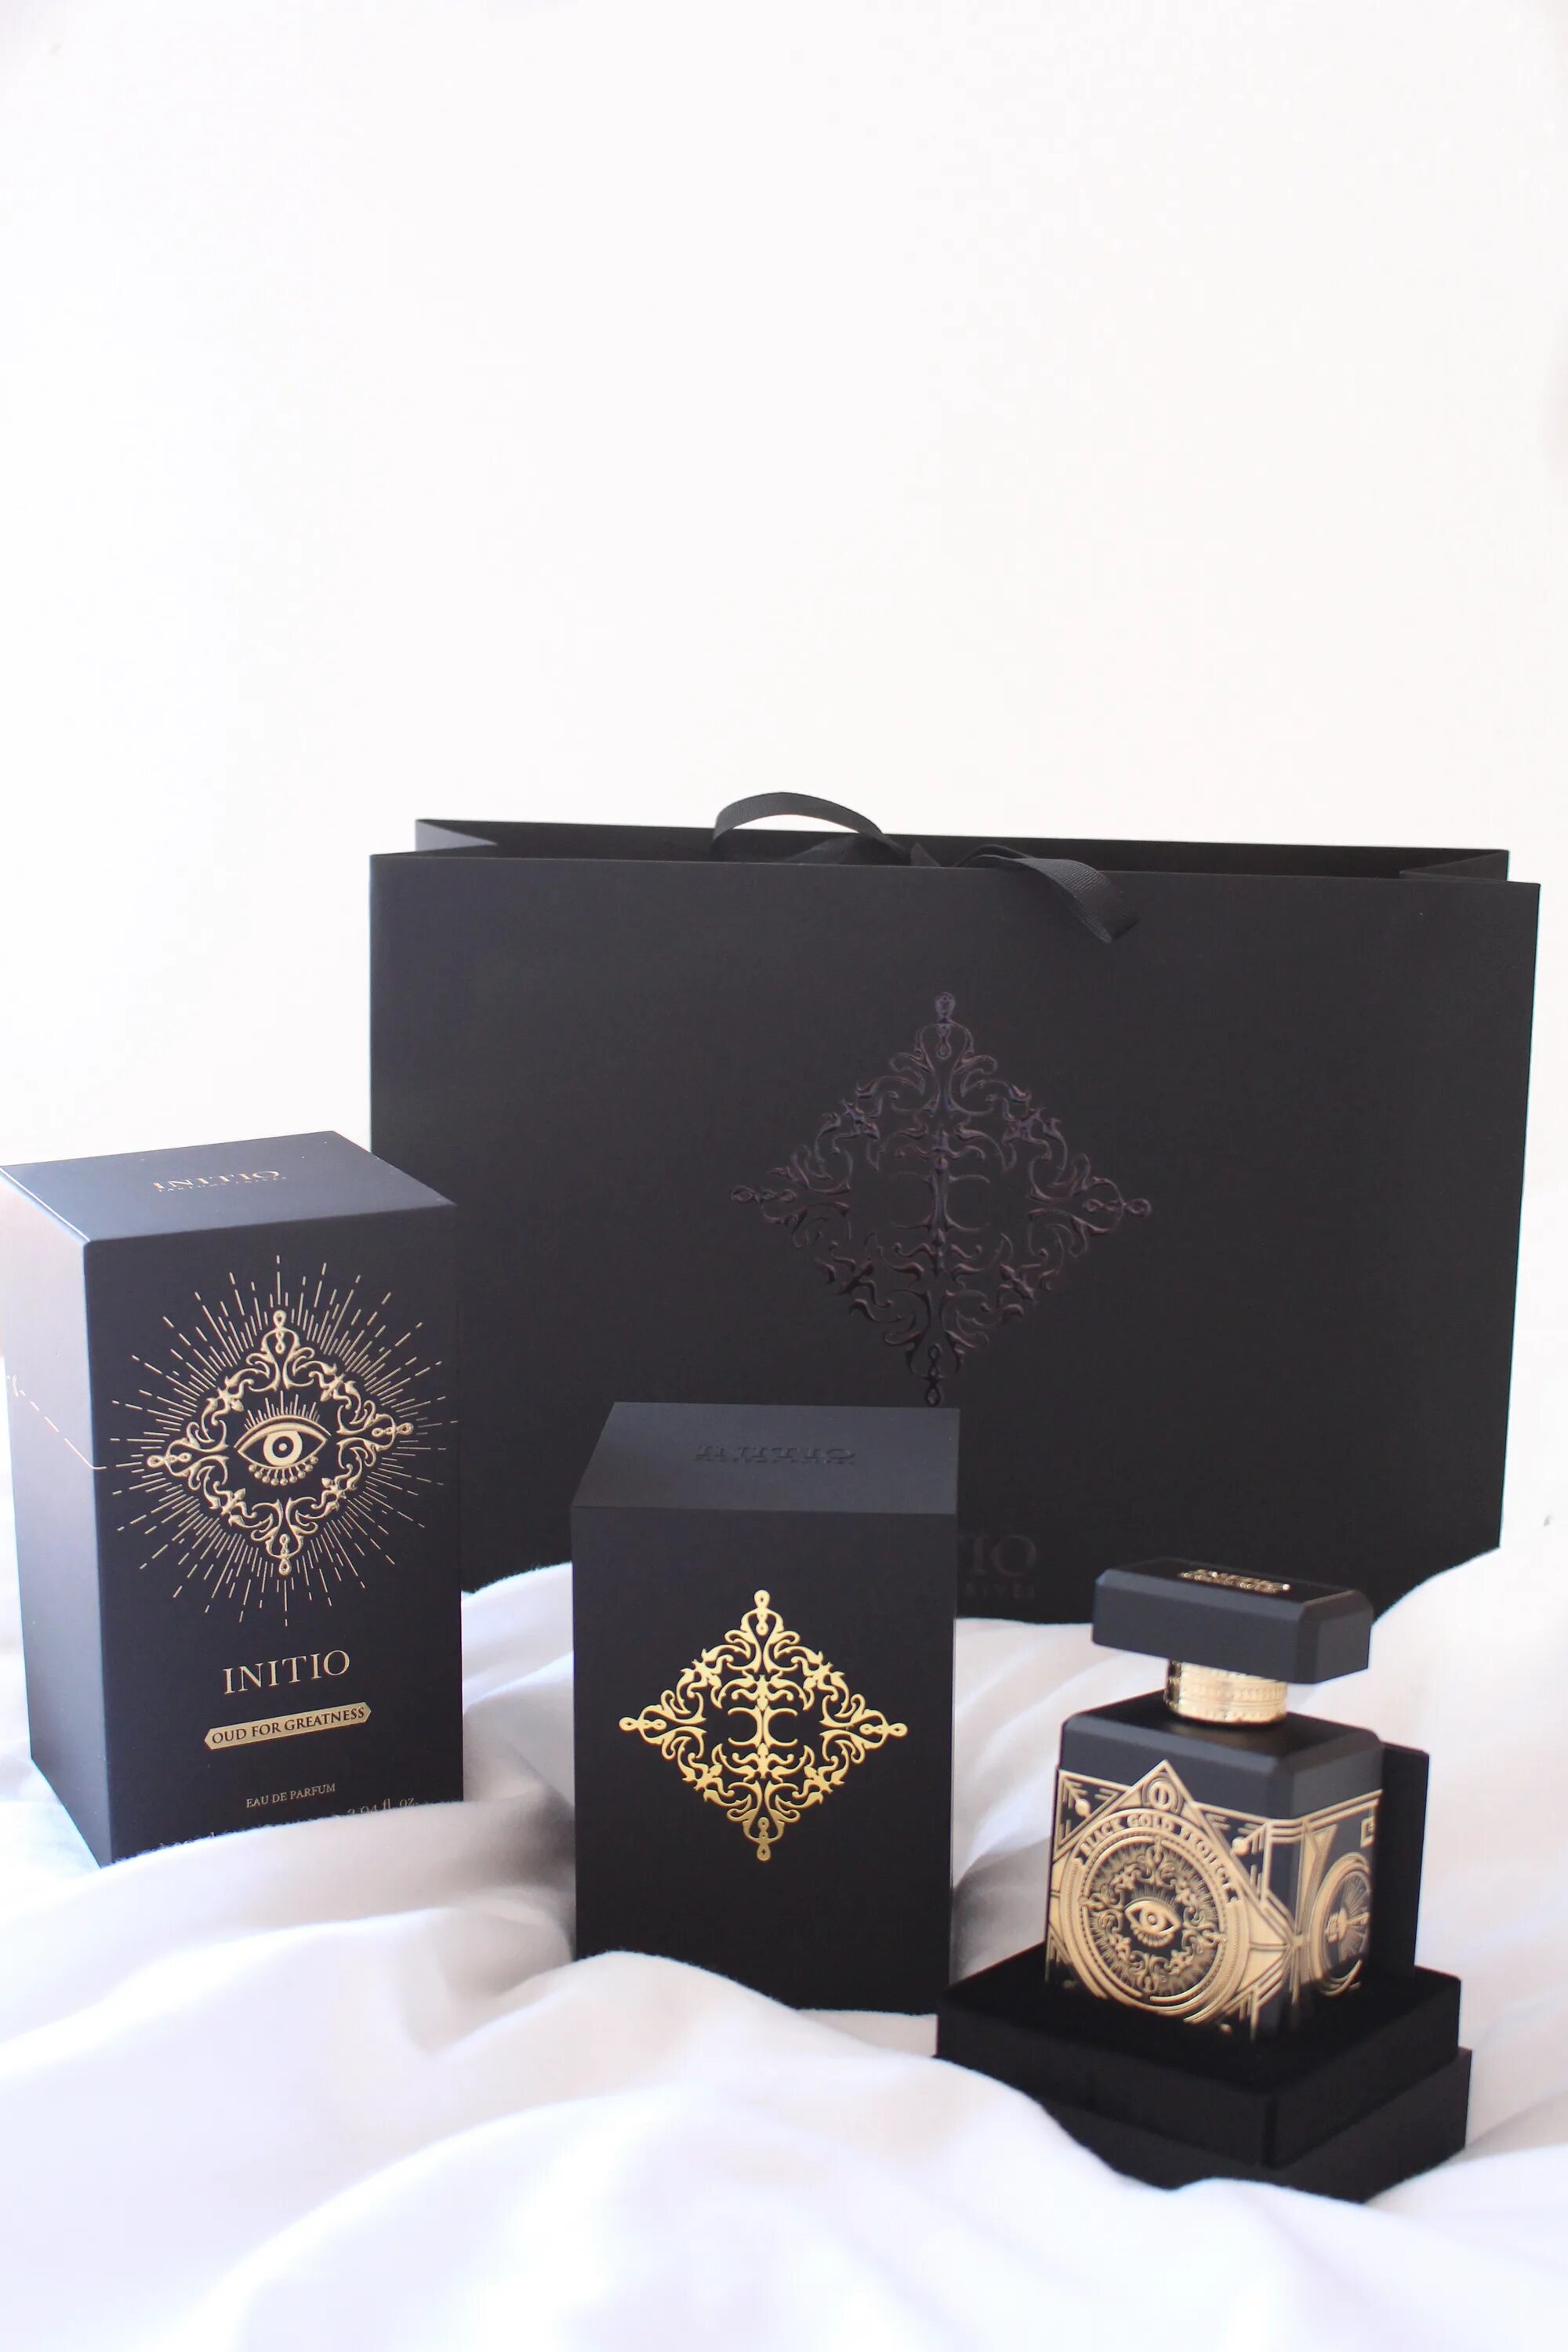 Initio Parfums oud for Greatness 90ml. Парфюм Initio Black Gold Project. Инитио Парфюм oud for Greatness. Initio Parfums prives oud for Happiness. Initio духи оригинал